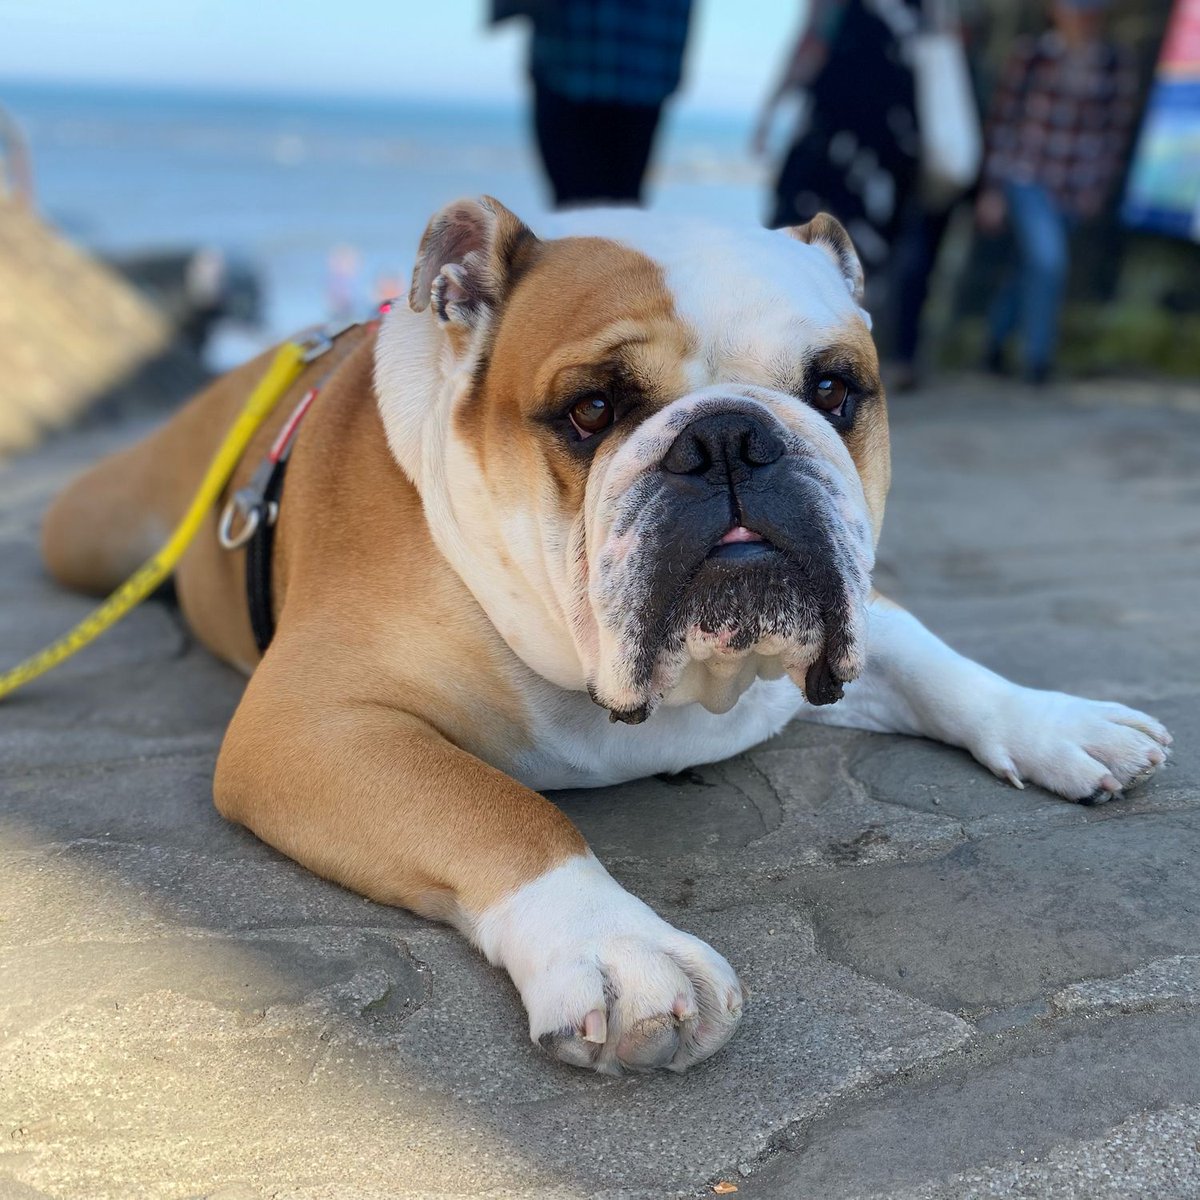 I did hear road trip 🚙!! We’re at the seaside 🌊☀️ and my bed is here so I think we’re staying 🐶🐾❤️ Barney #BarneyTheBulldog #DogsOfTwitter #DogsOfX #DogsOfIG #DogsOfFacebook #Bulldog #EnglishBulldog #RoadTrip